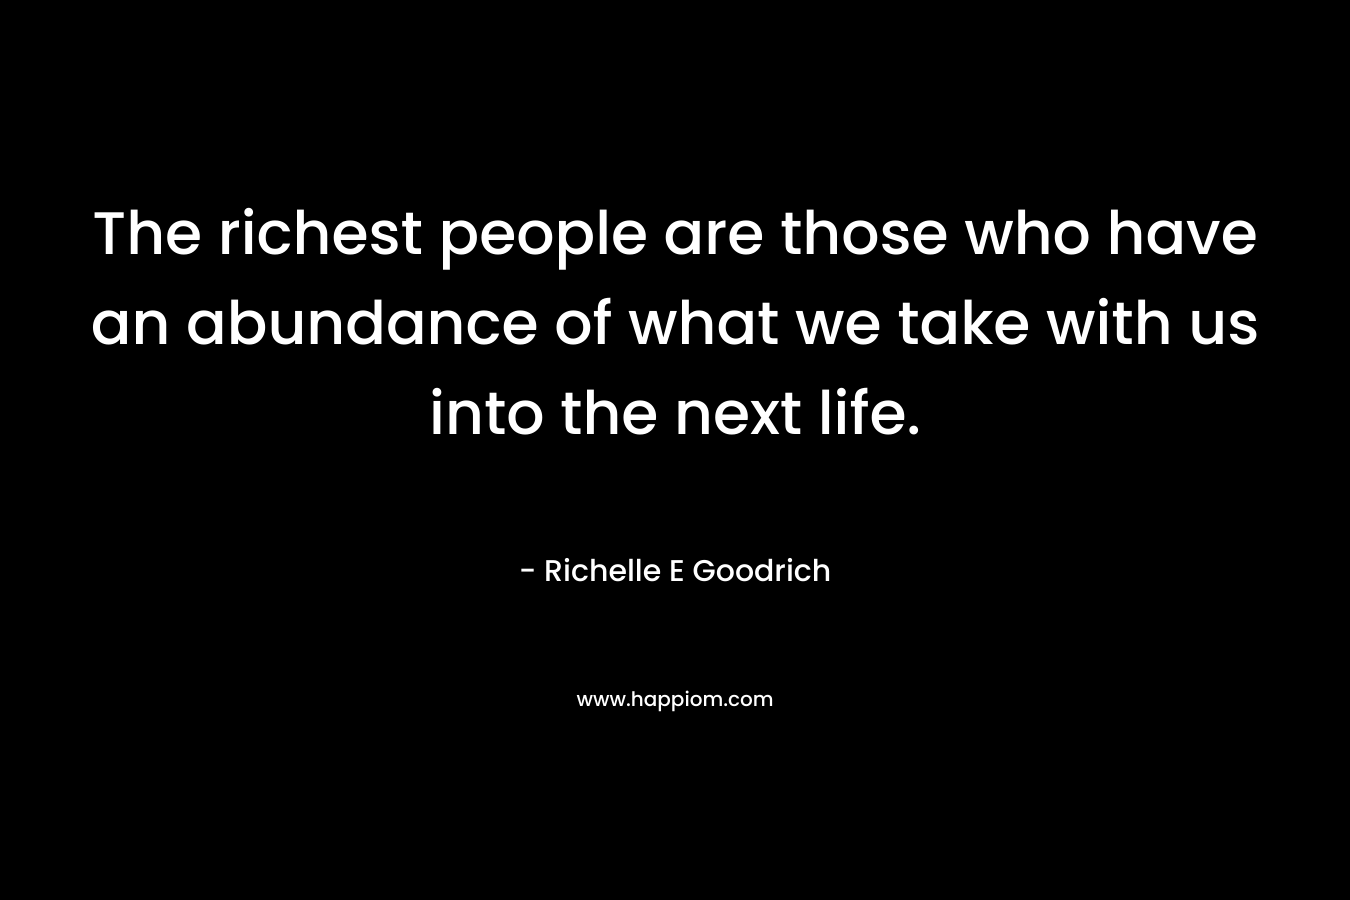 The richest people are those who have an abundance of what we take with us into the next life. – Richelle E Goodrich